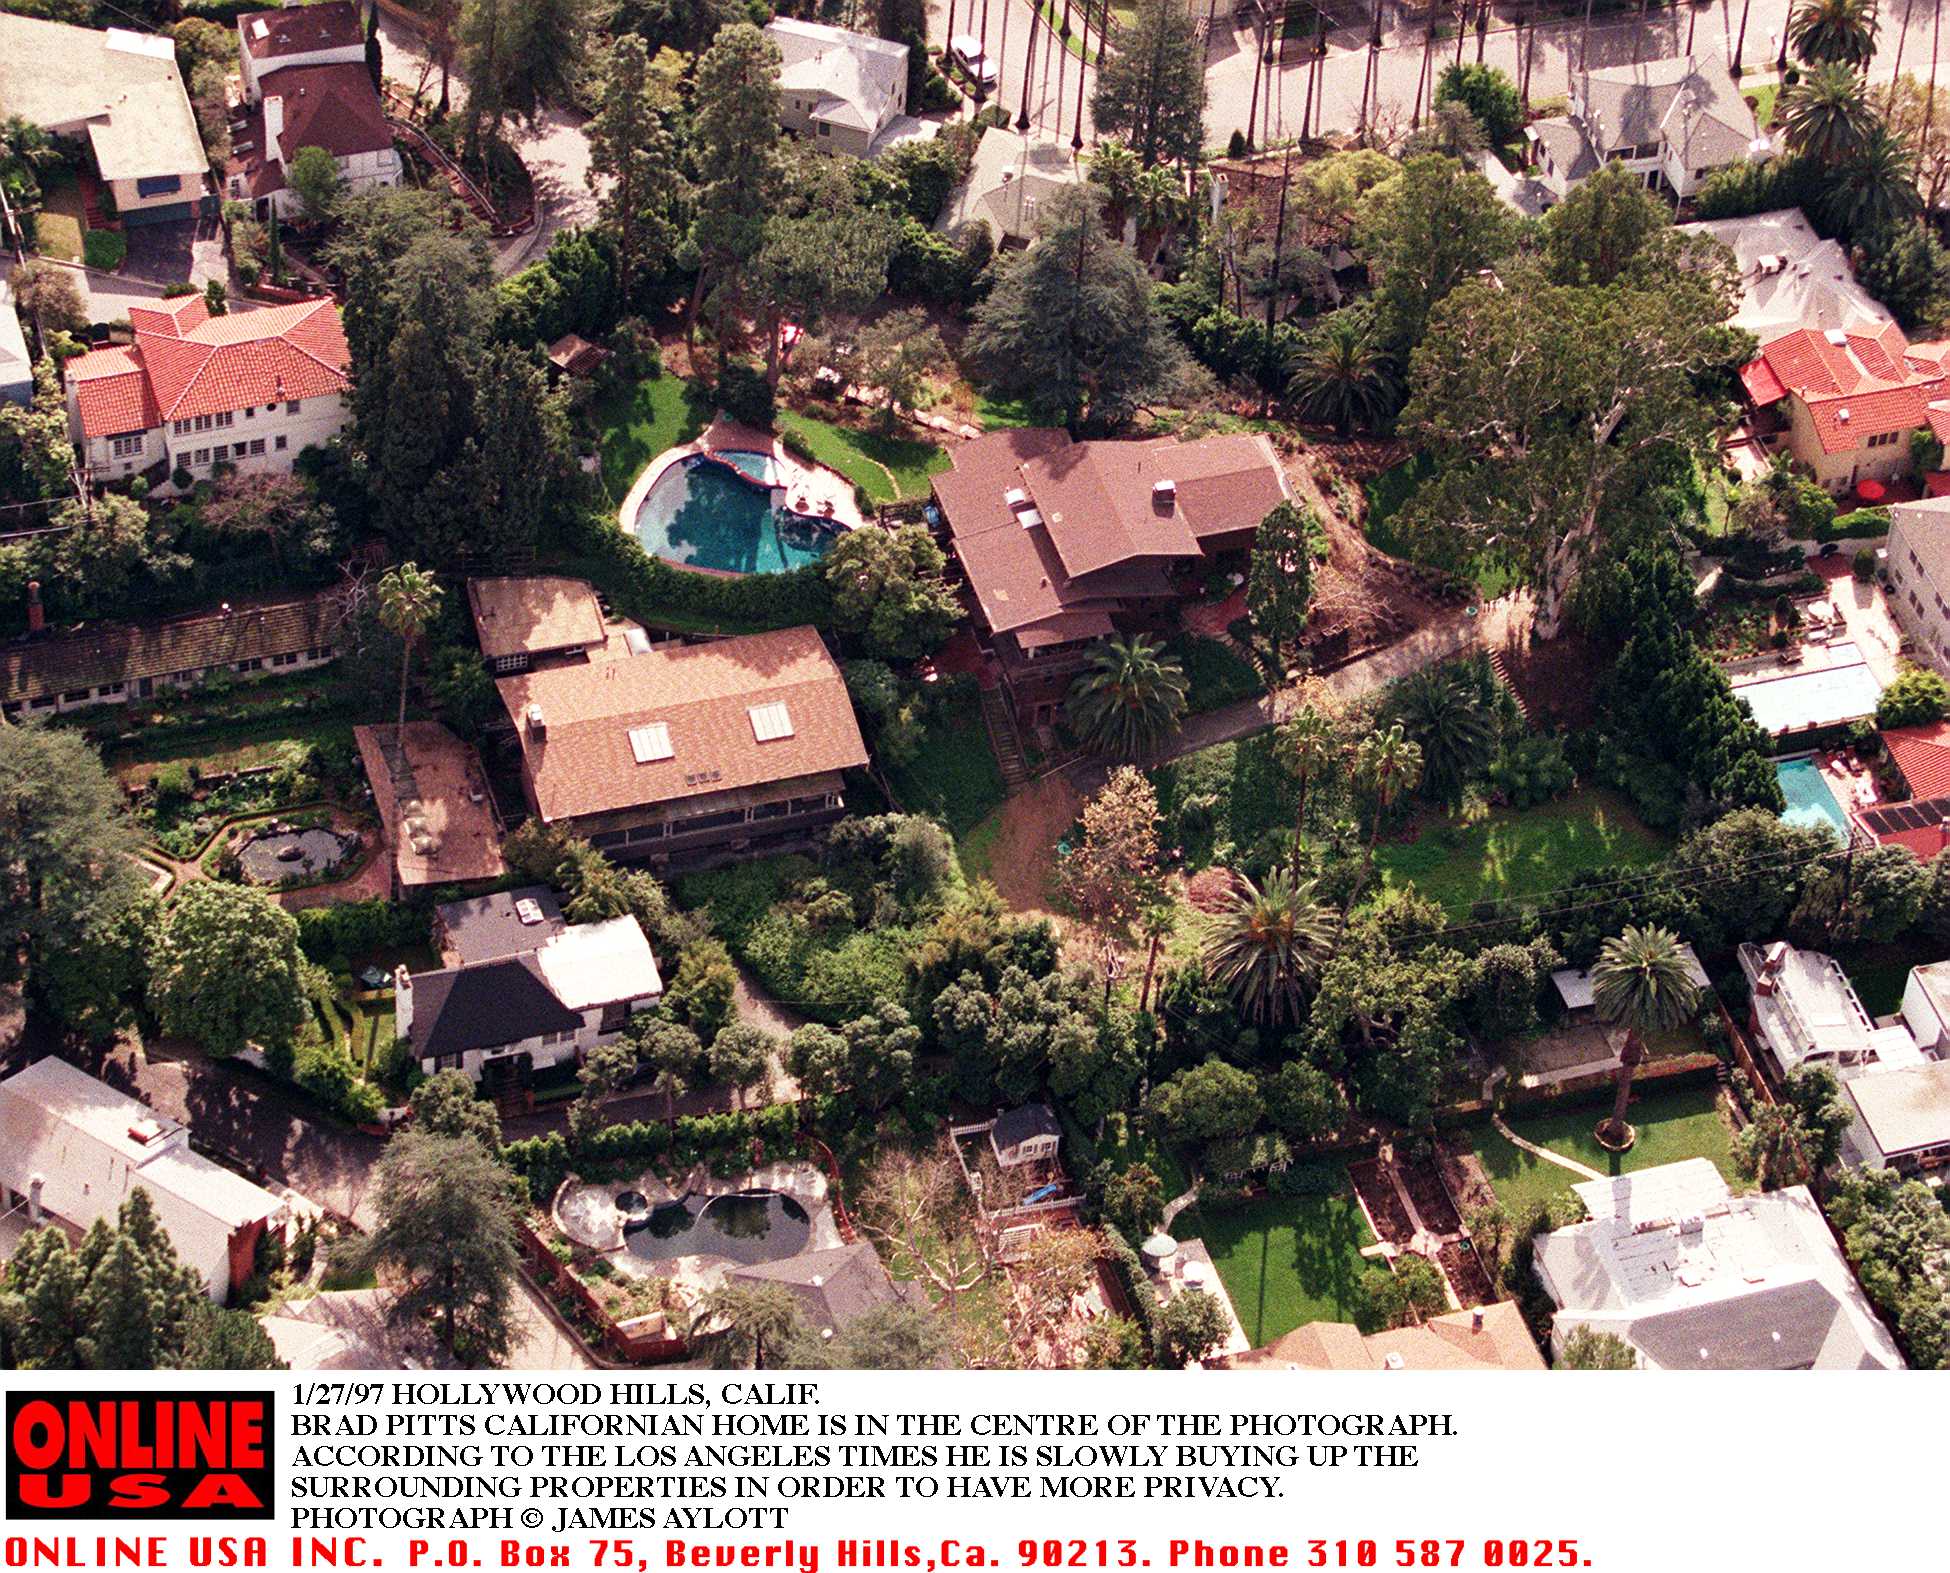 Brad Pitt extending his estate by buying up adjacent properties to his Hollywood Hills, California home on January 27, 1997 | Source: Getty Images